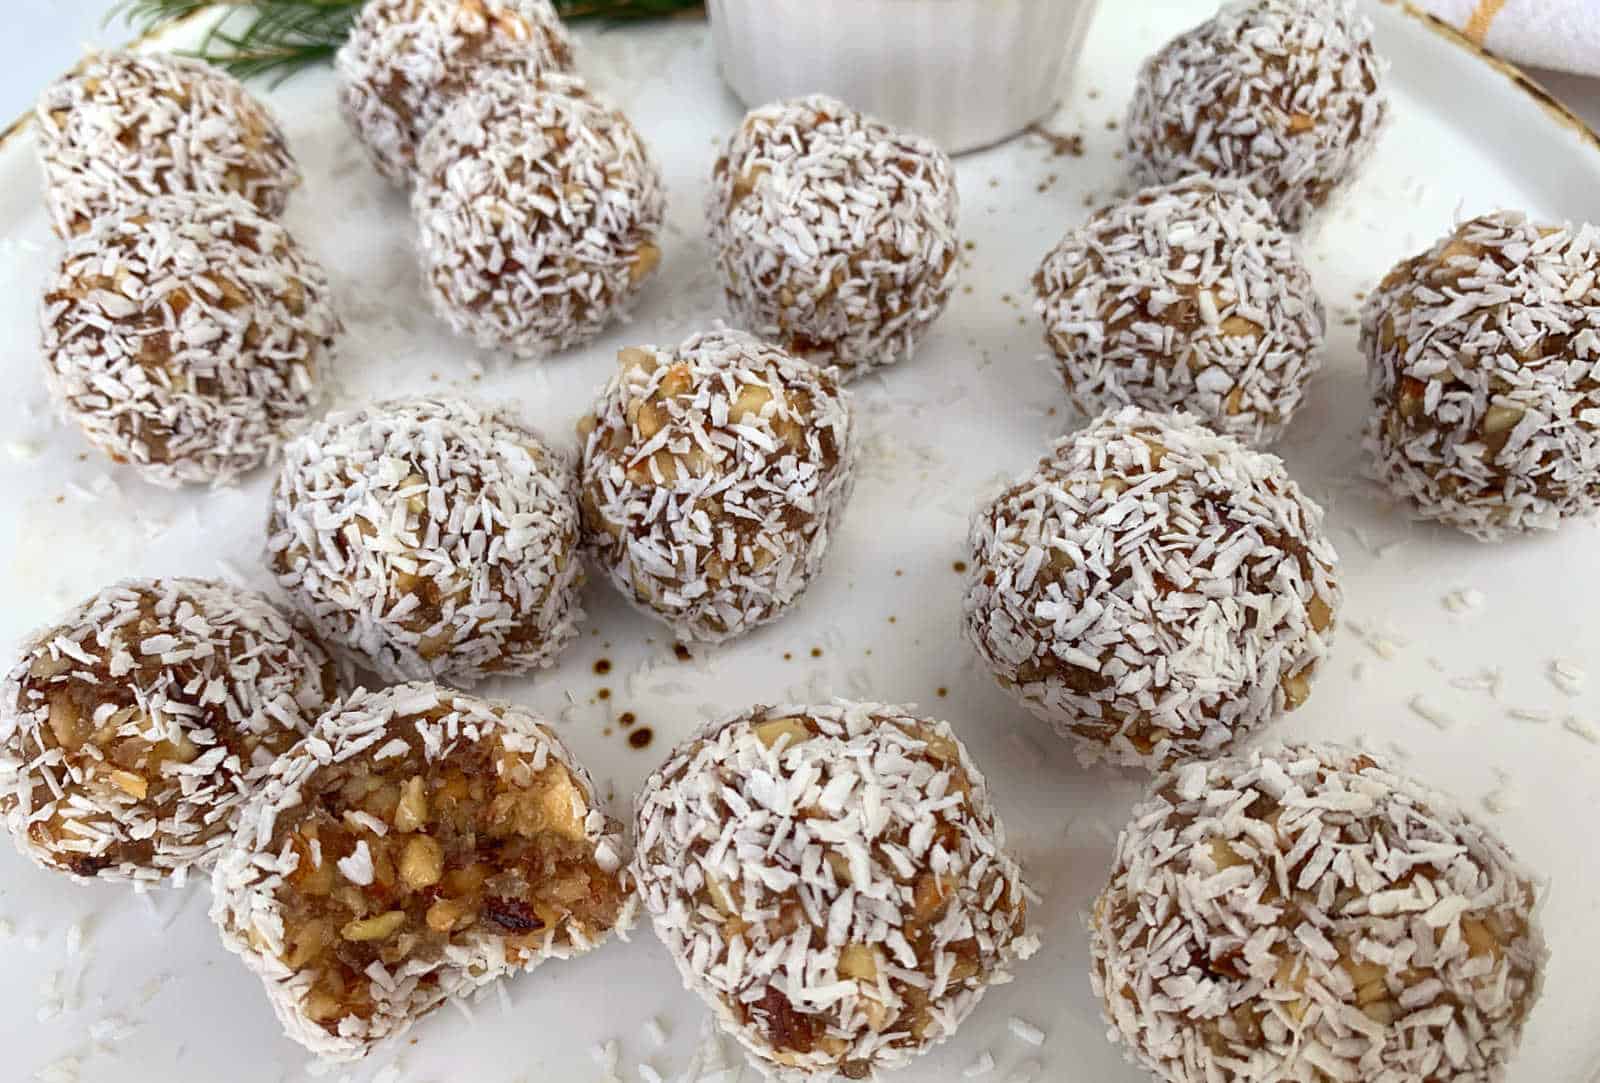 Coconut energy balls on a white plate.